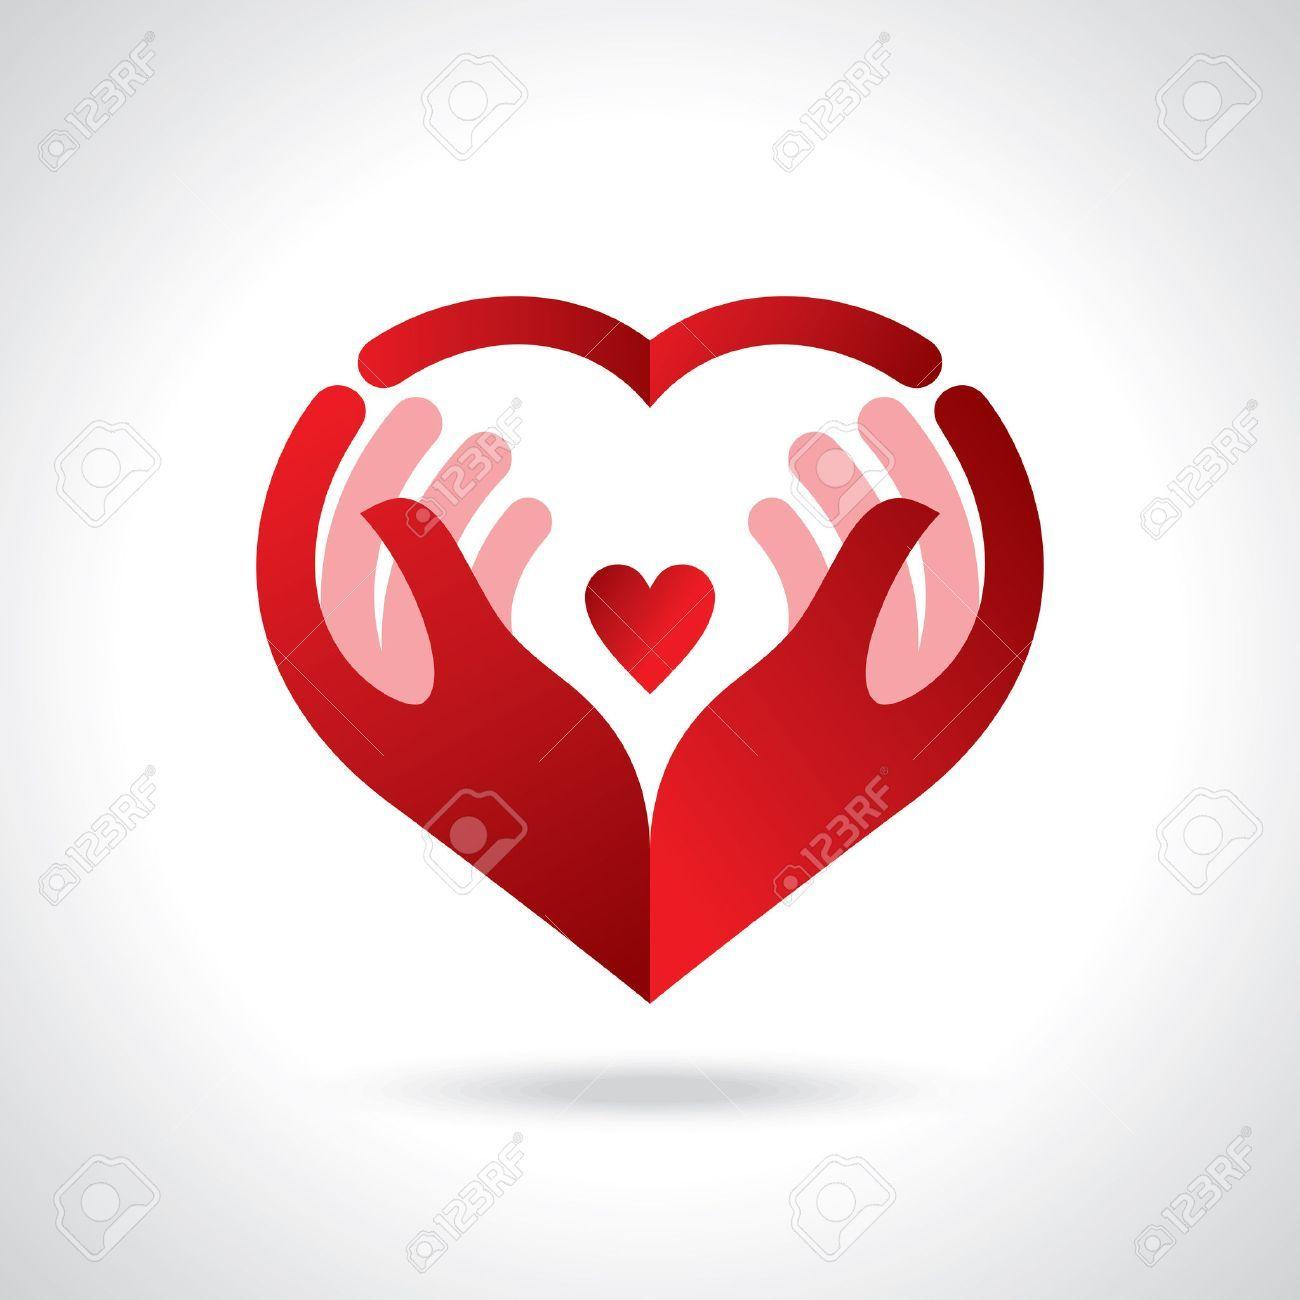 Red Heart Hands Logo - Free Heart Hand Icon 300297 | Download Heart Hand Icon - 300297